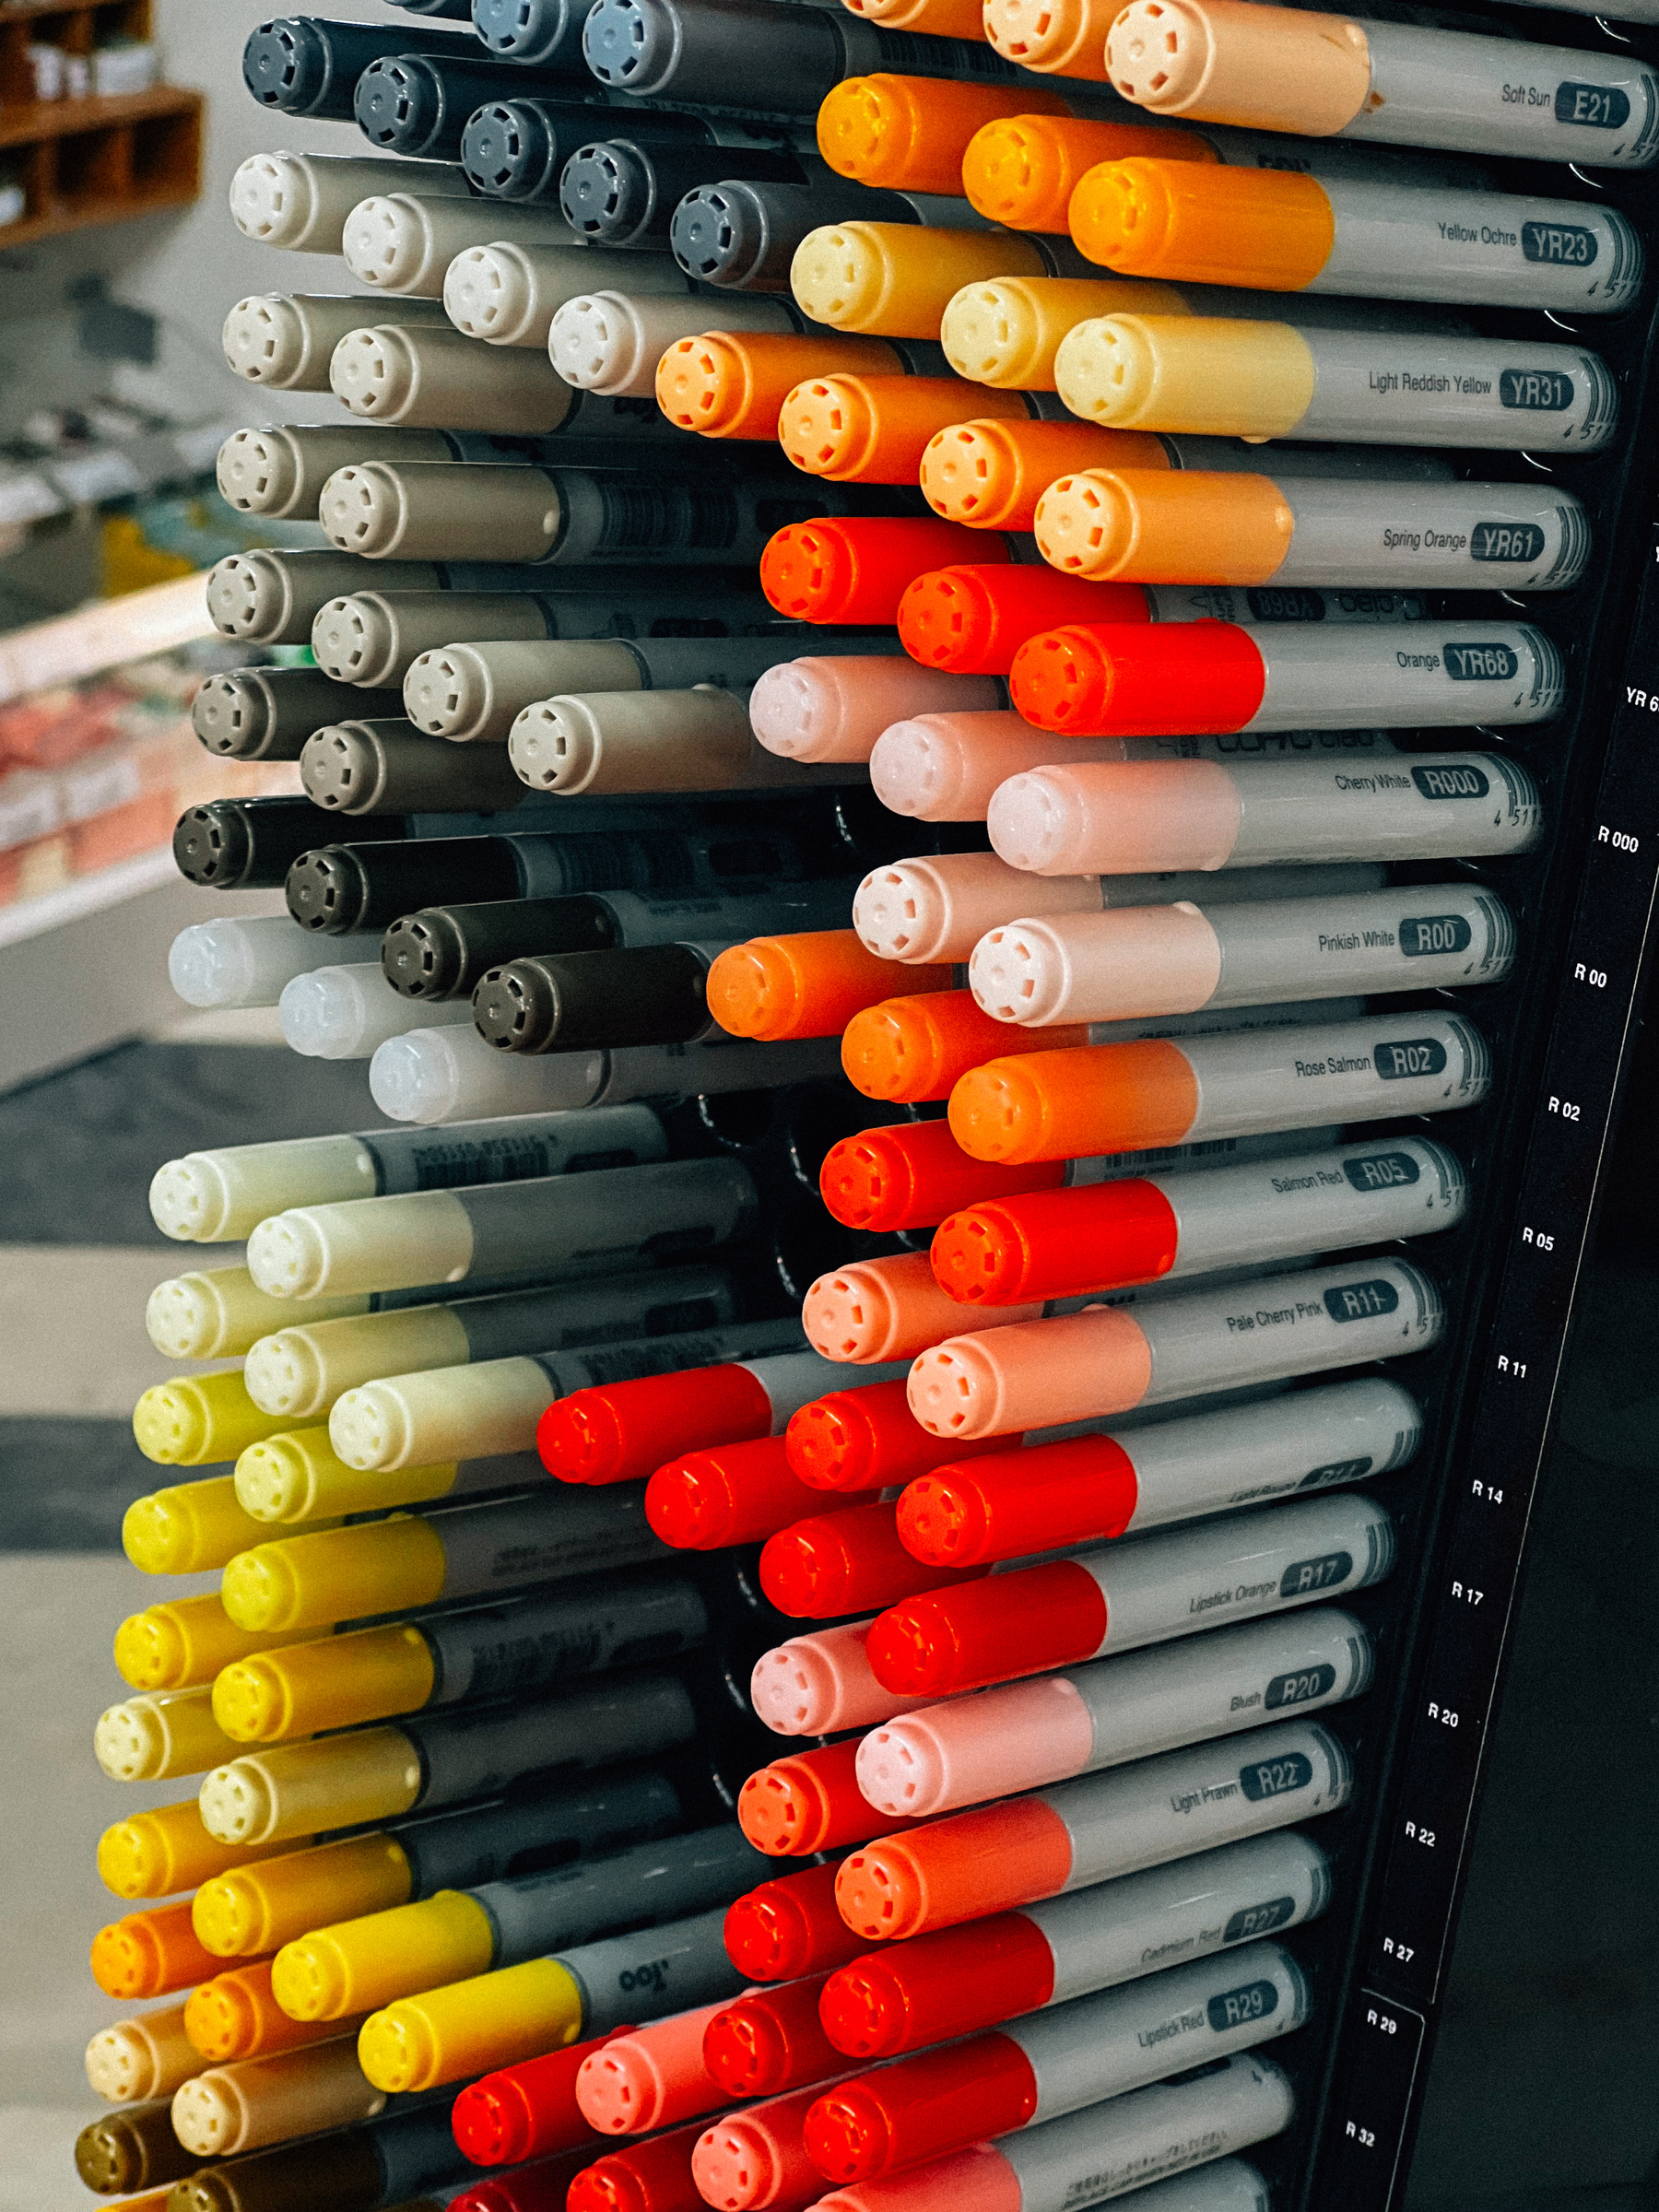 A collection of markers in a variety of colors, with caps showing, aligned in slots with color codes labeled on the right.